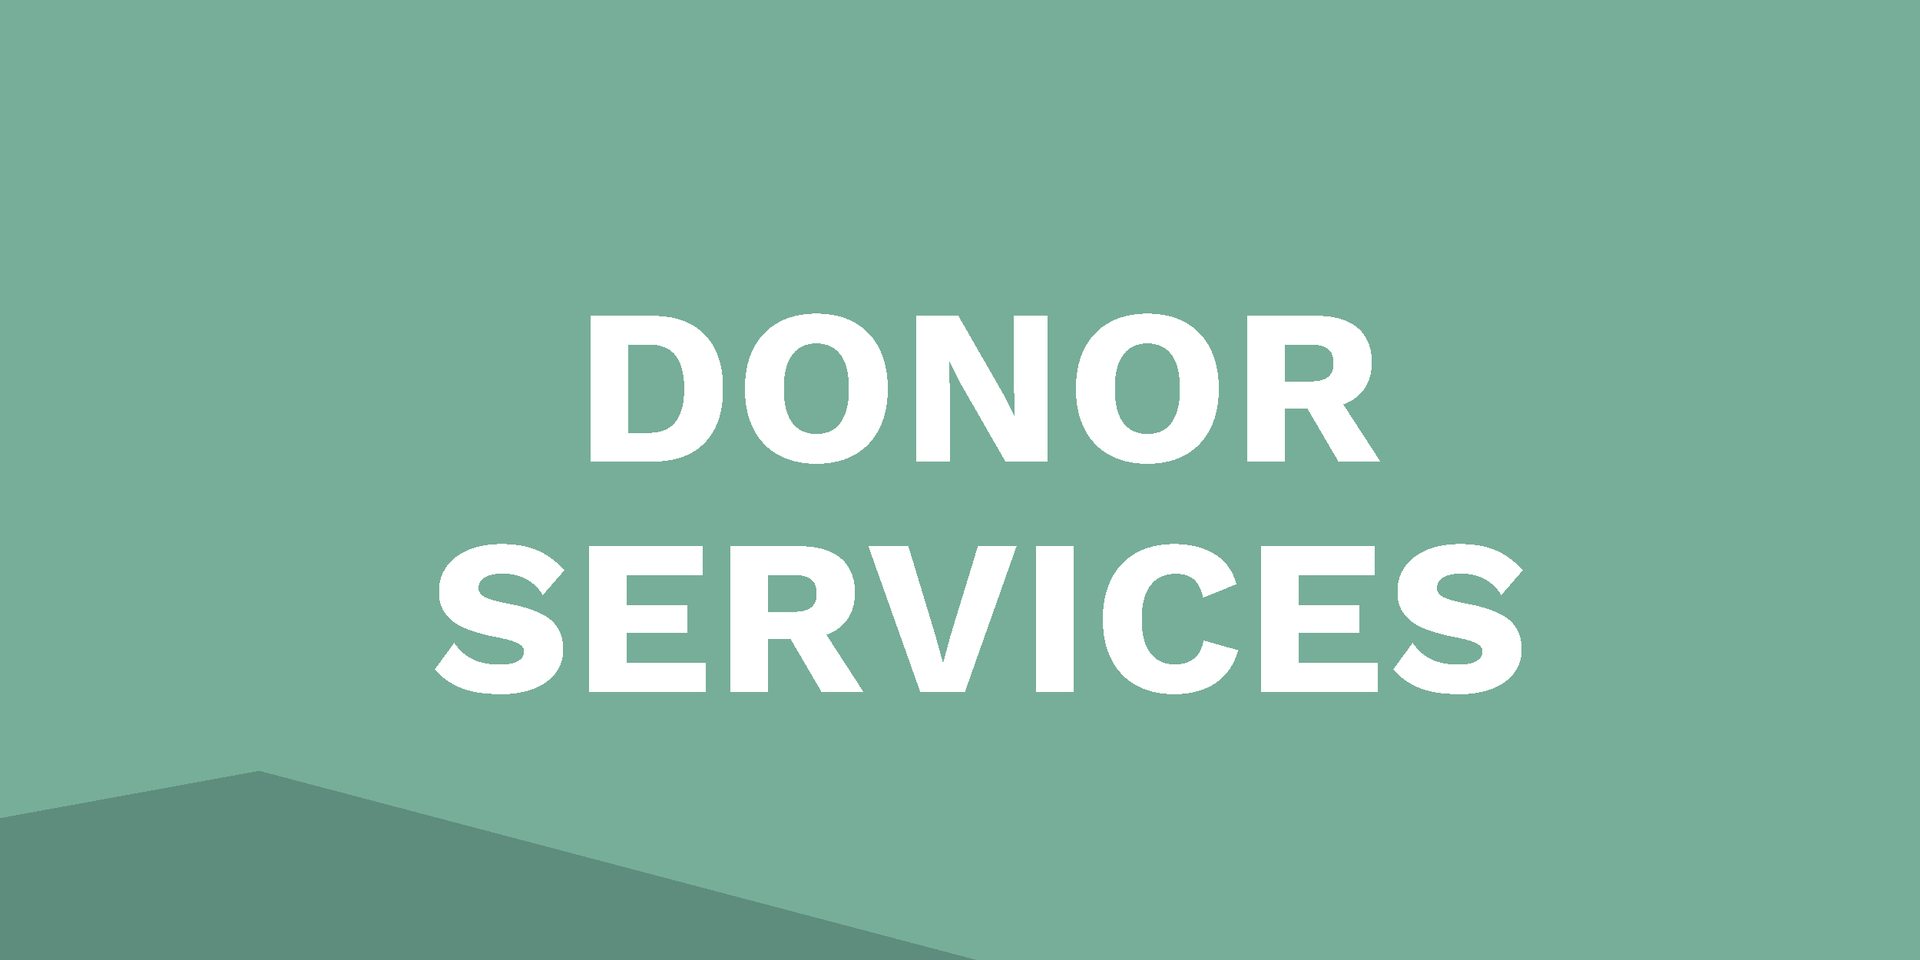 The word donor services is on a green background.